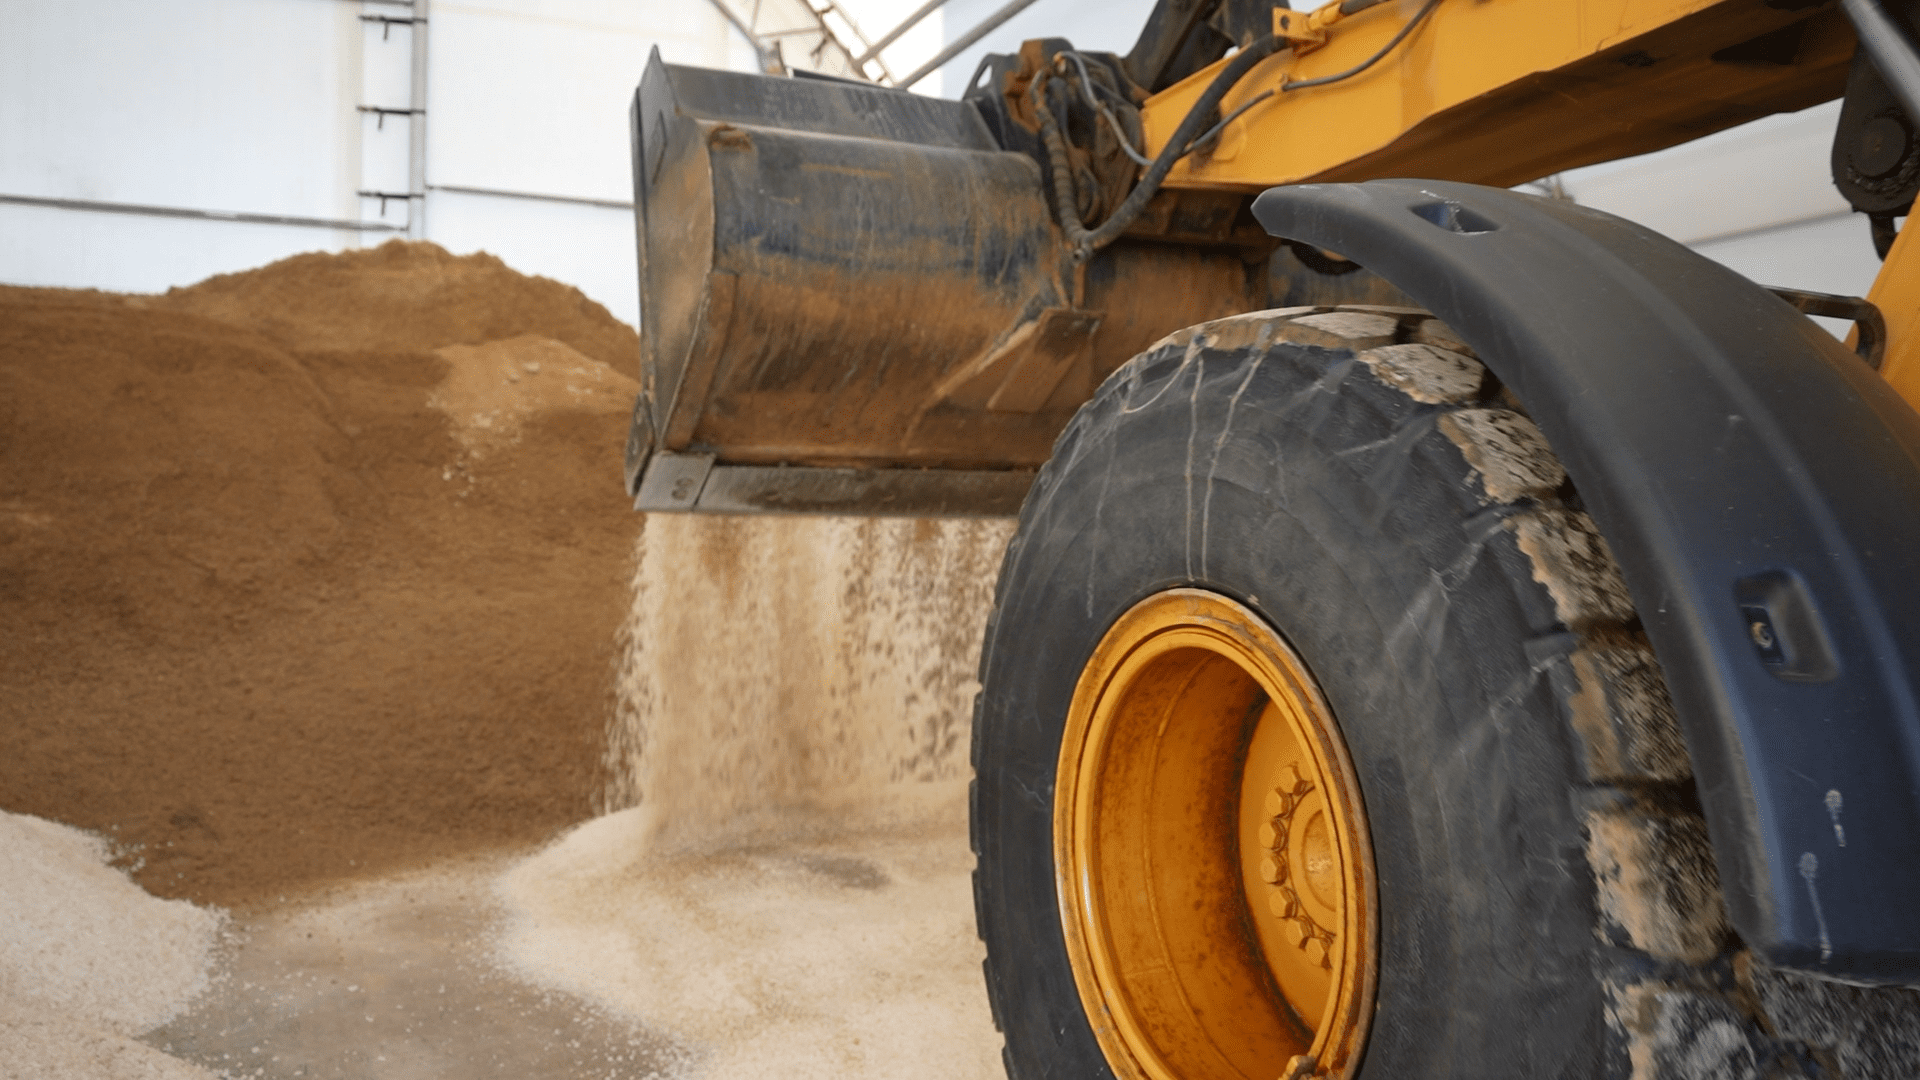 A commercial bulldozer is loading sand into a silo for snow and ice management purposes.